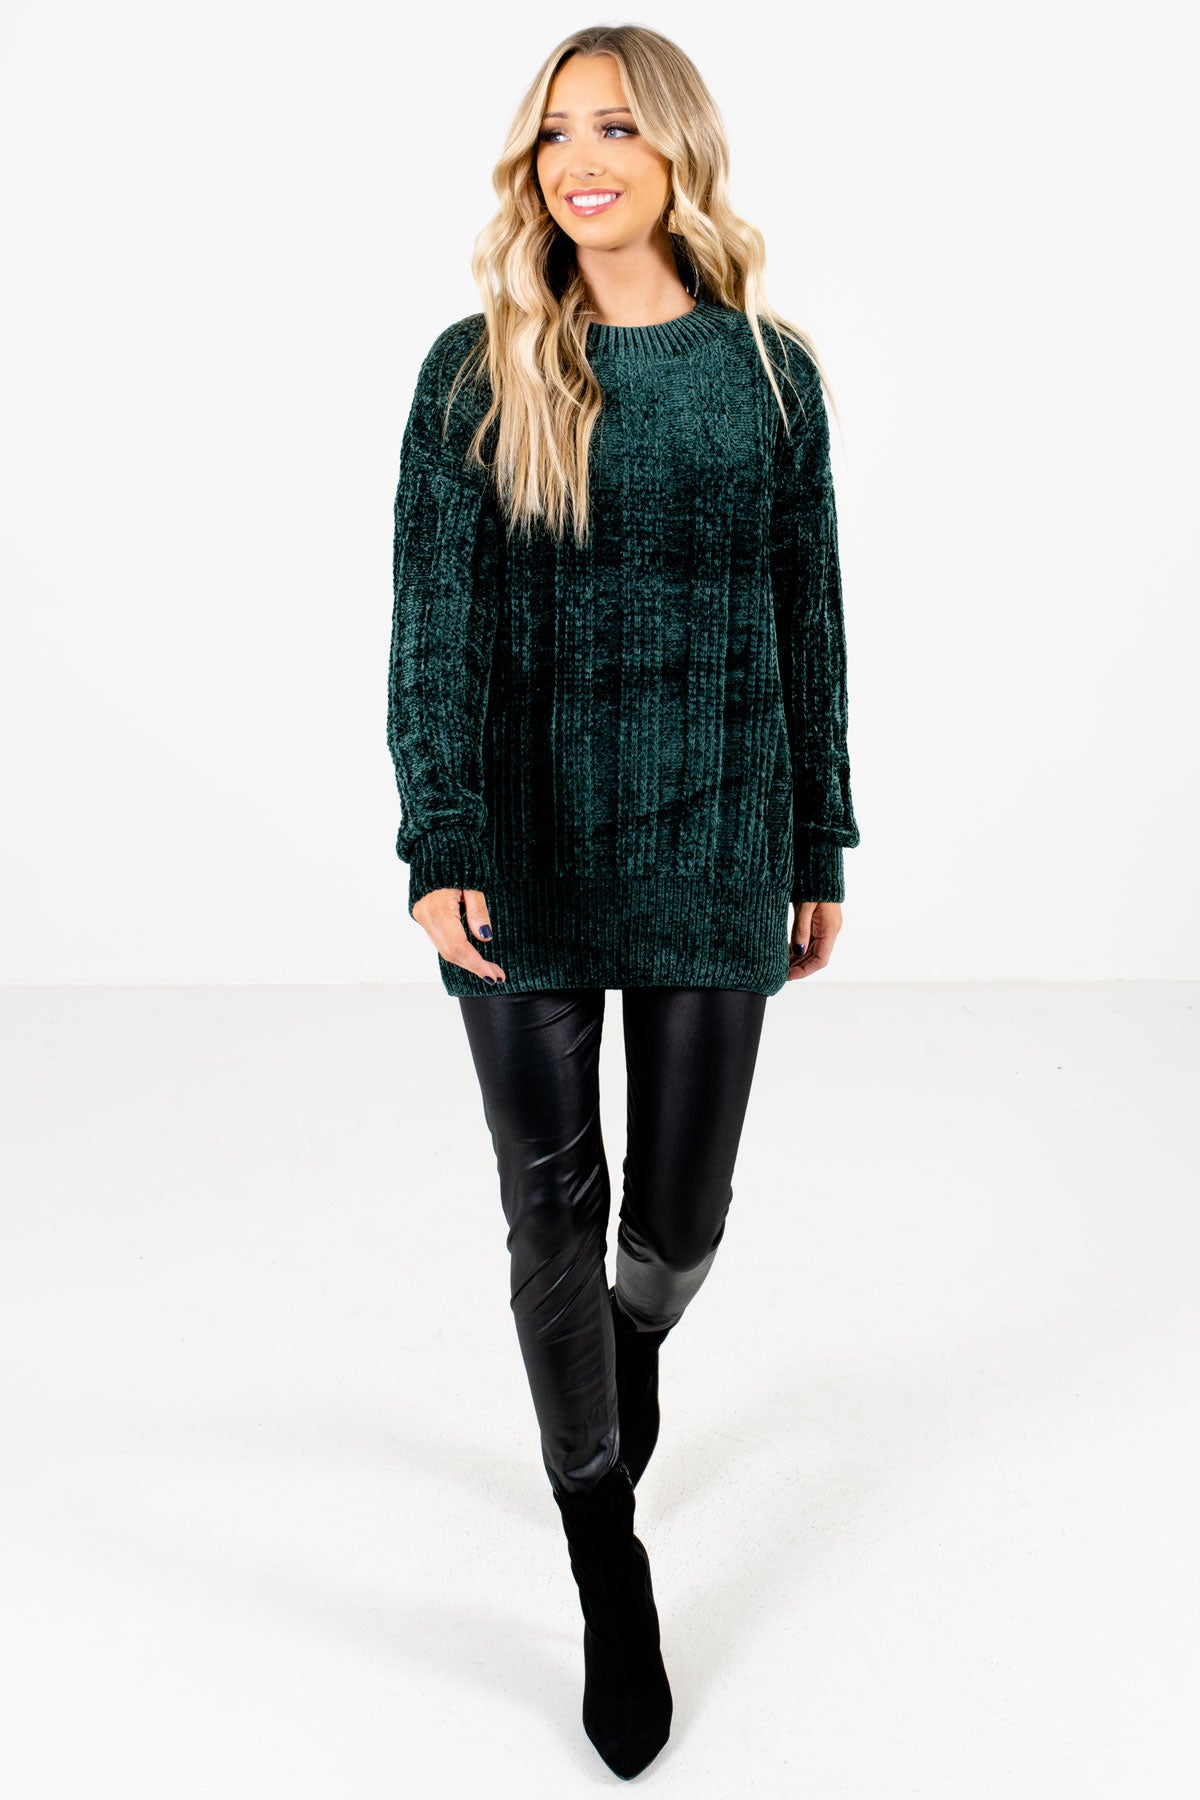 Green Cute and Comfortable Boutique Sweaters for Women